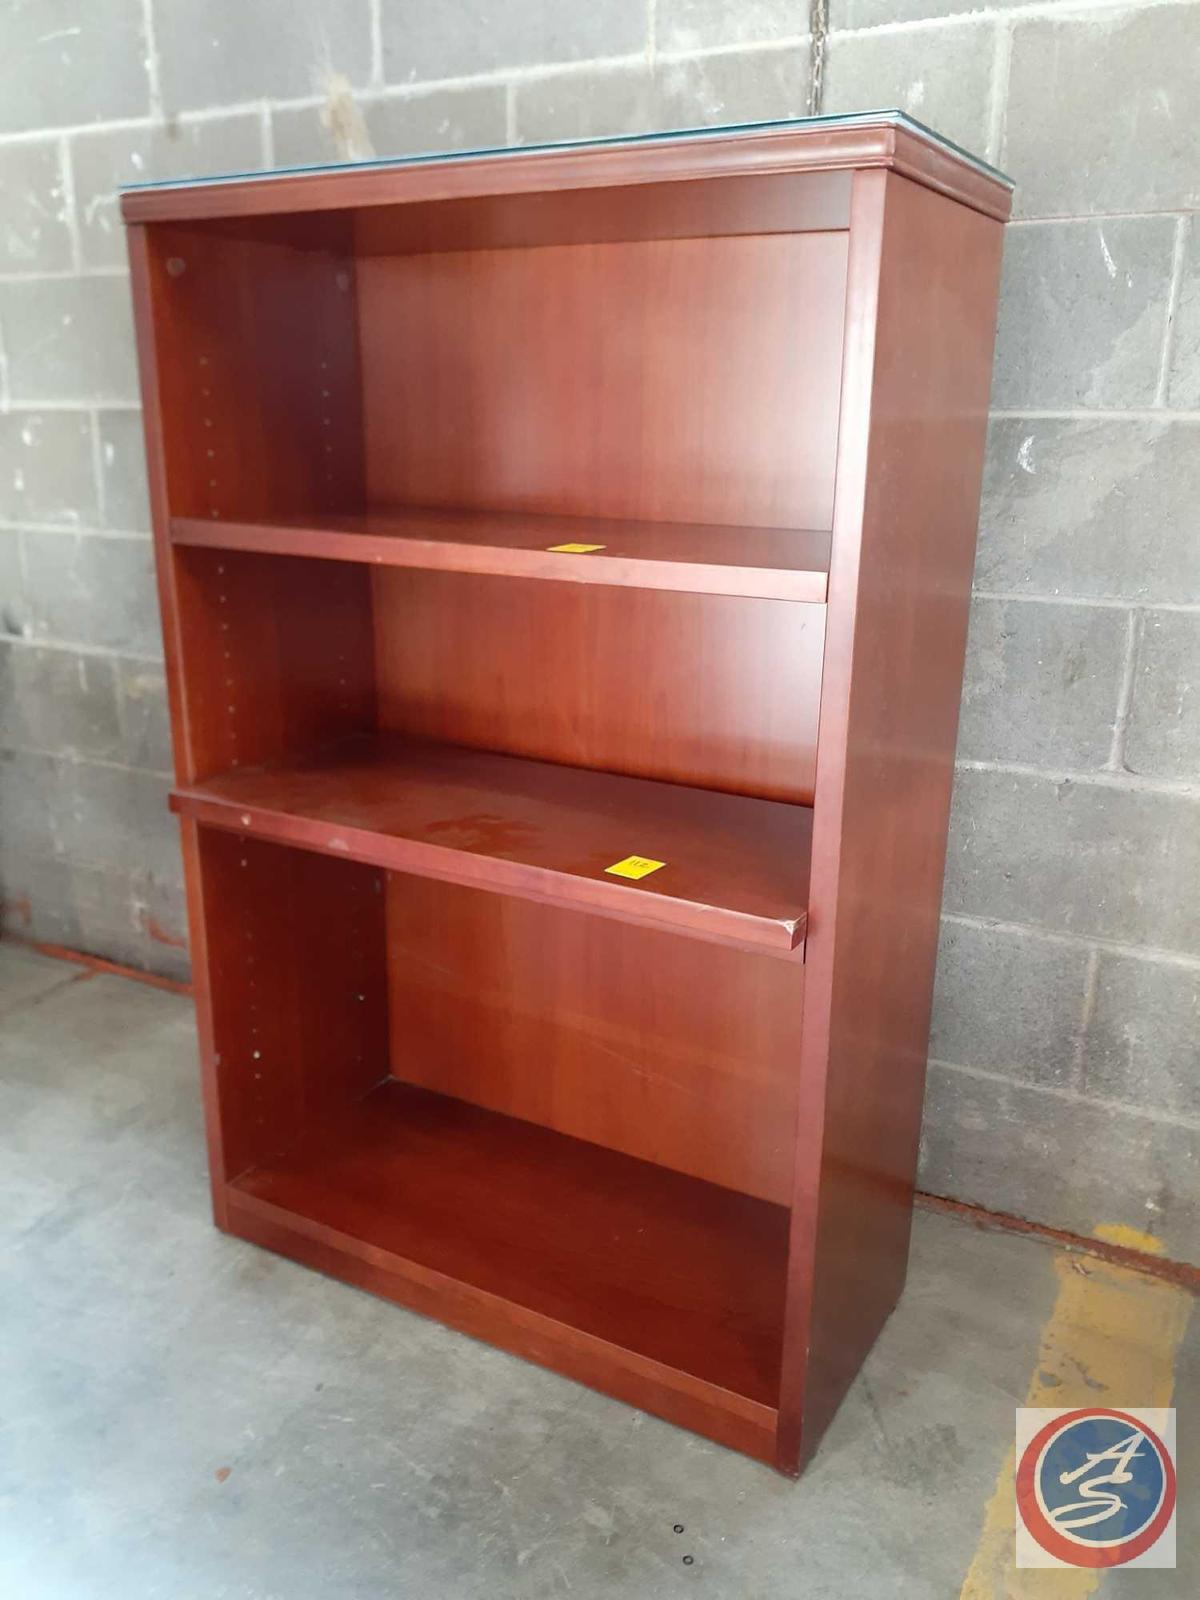 wood bookcase with four shelves (three are adjustable). The back of the bookcase appears to be